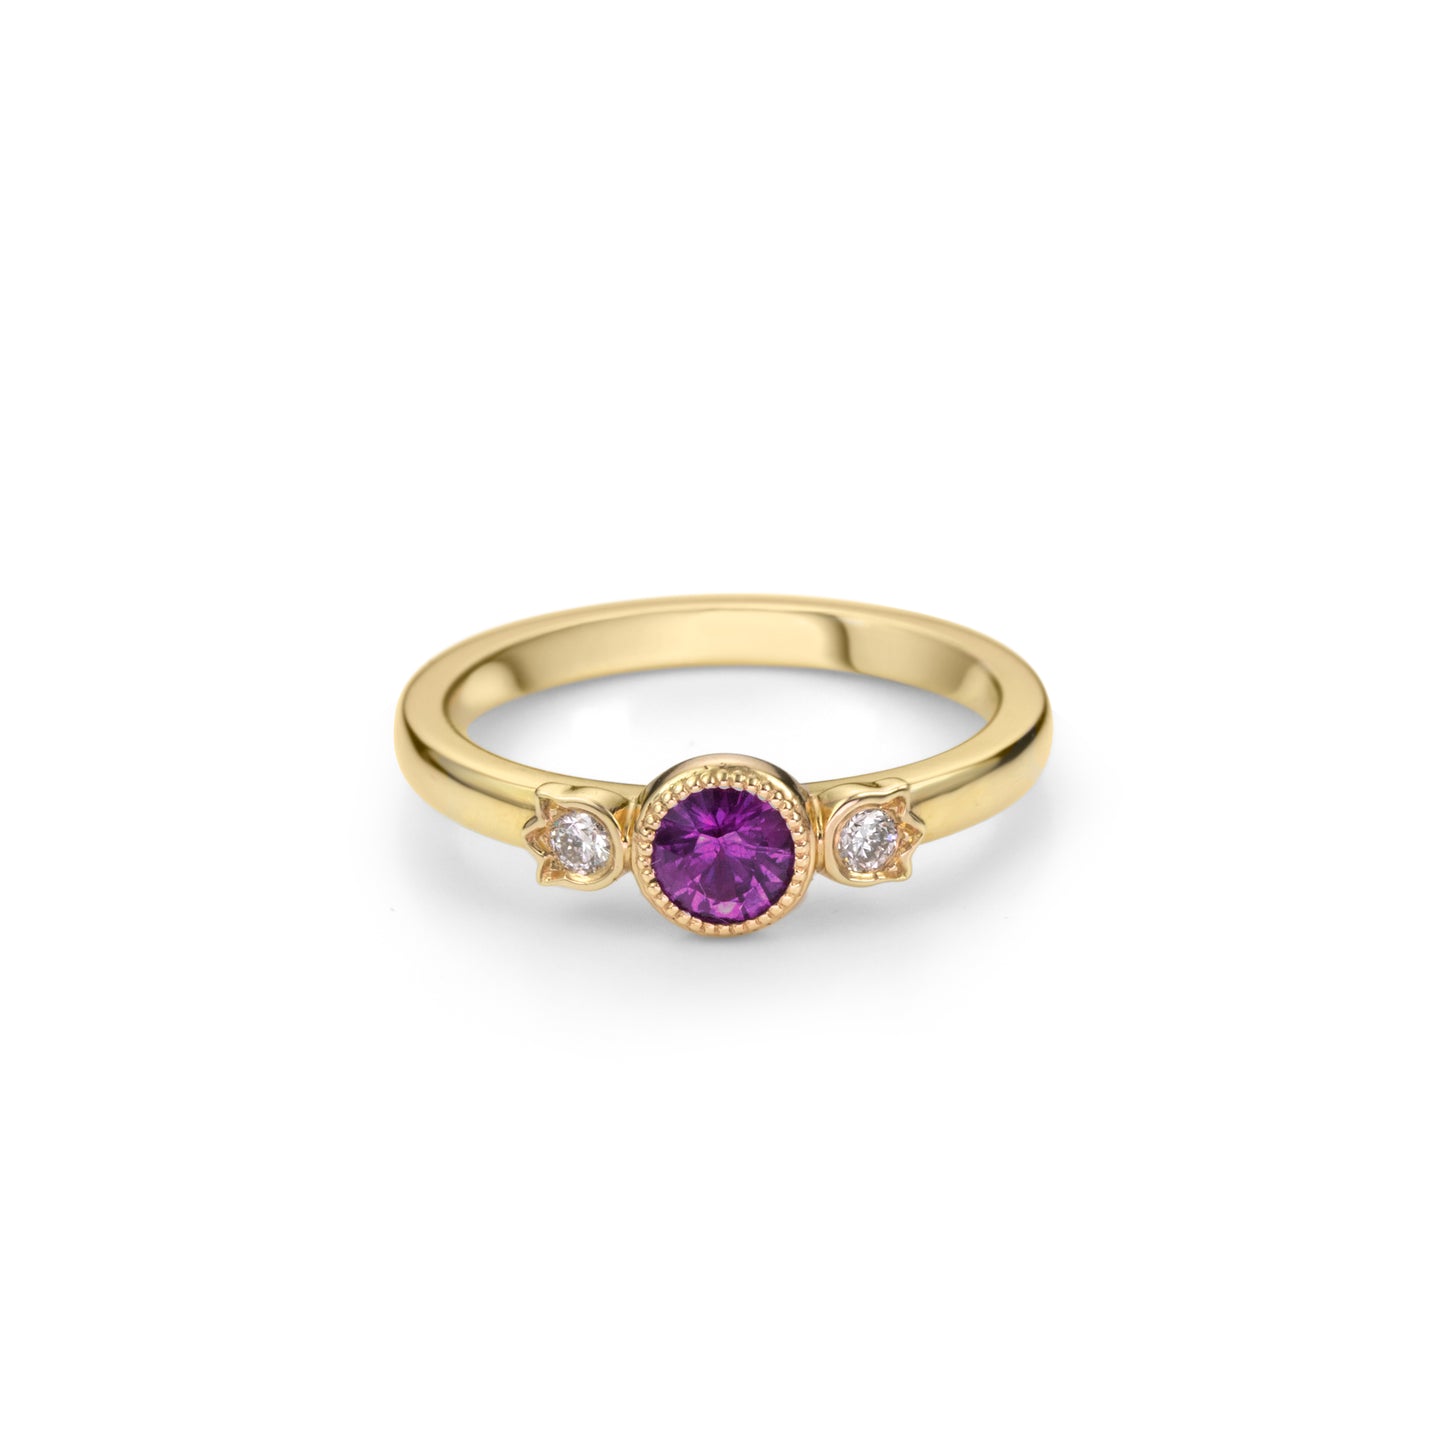 Yellow gold stackable ring with round beaded bezel set plum purple sapphire and diamonds in flower setting on each side.